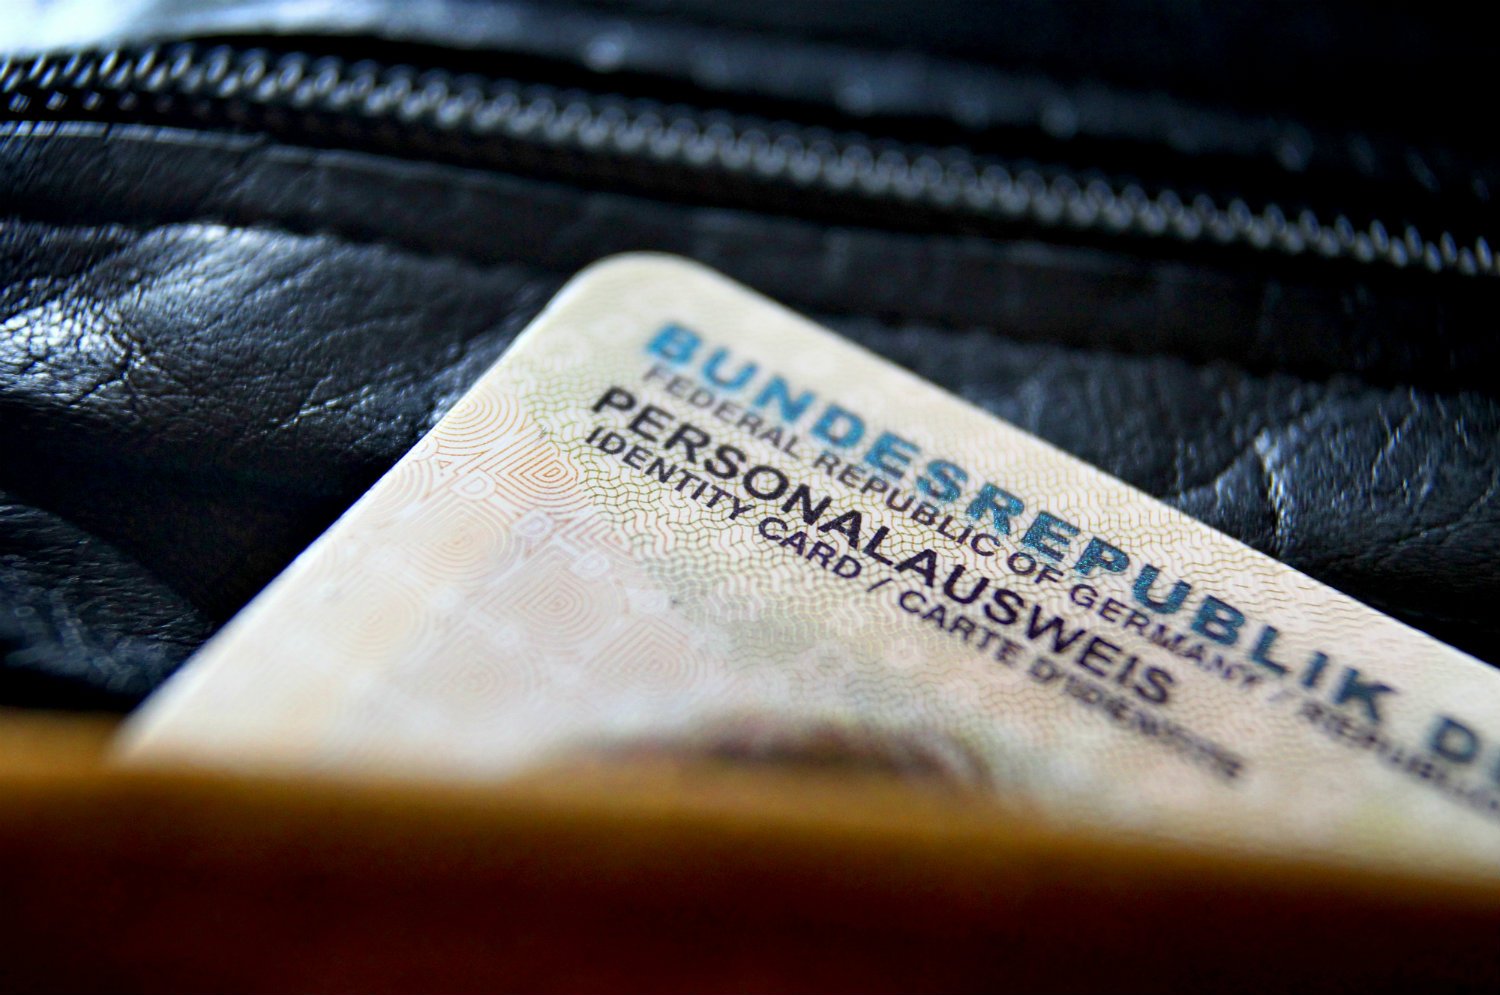 Personalausweis: Cost of German ID card set to rise - The Local